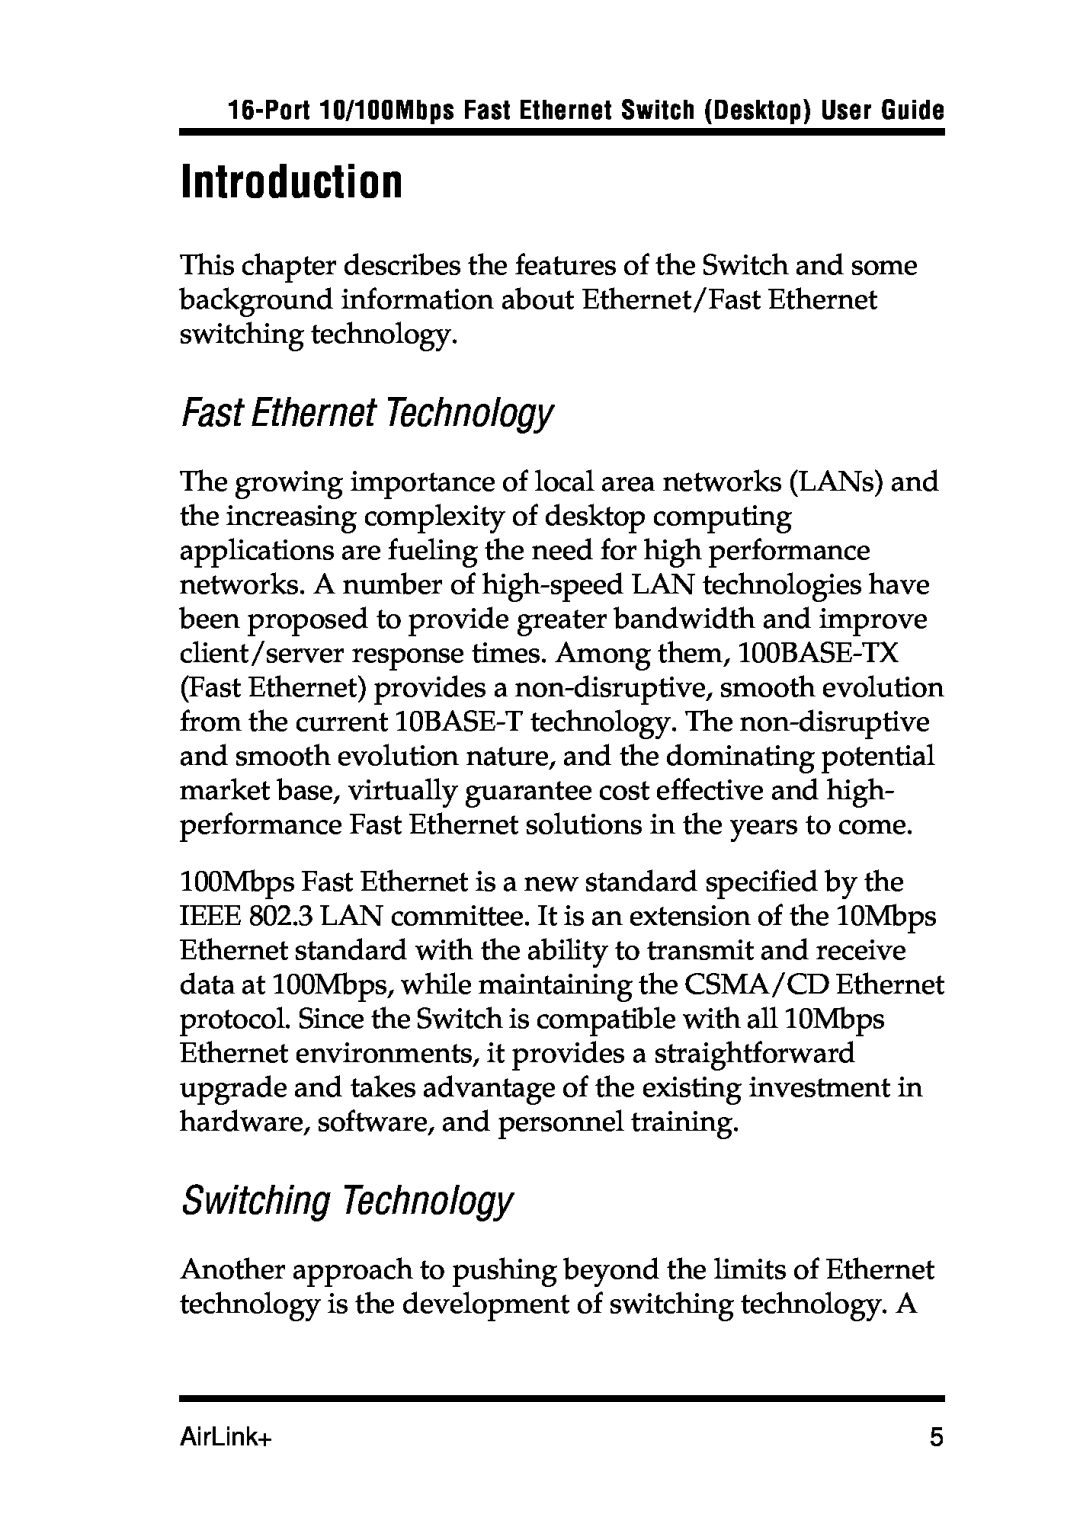 Airlink UG-ASW116-1103 manual Introduction, Fast Ethernet Technology, Switching Technology 